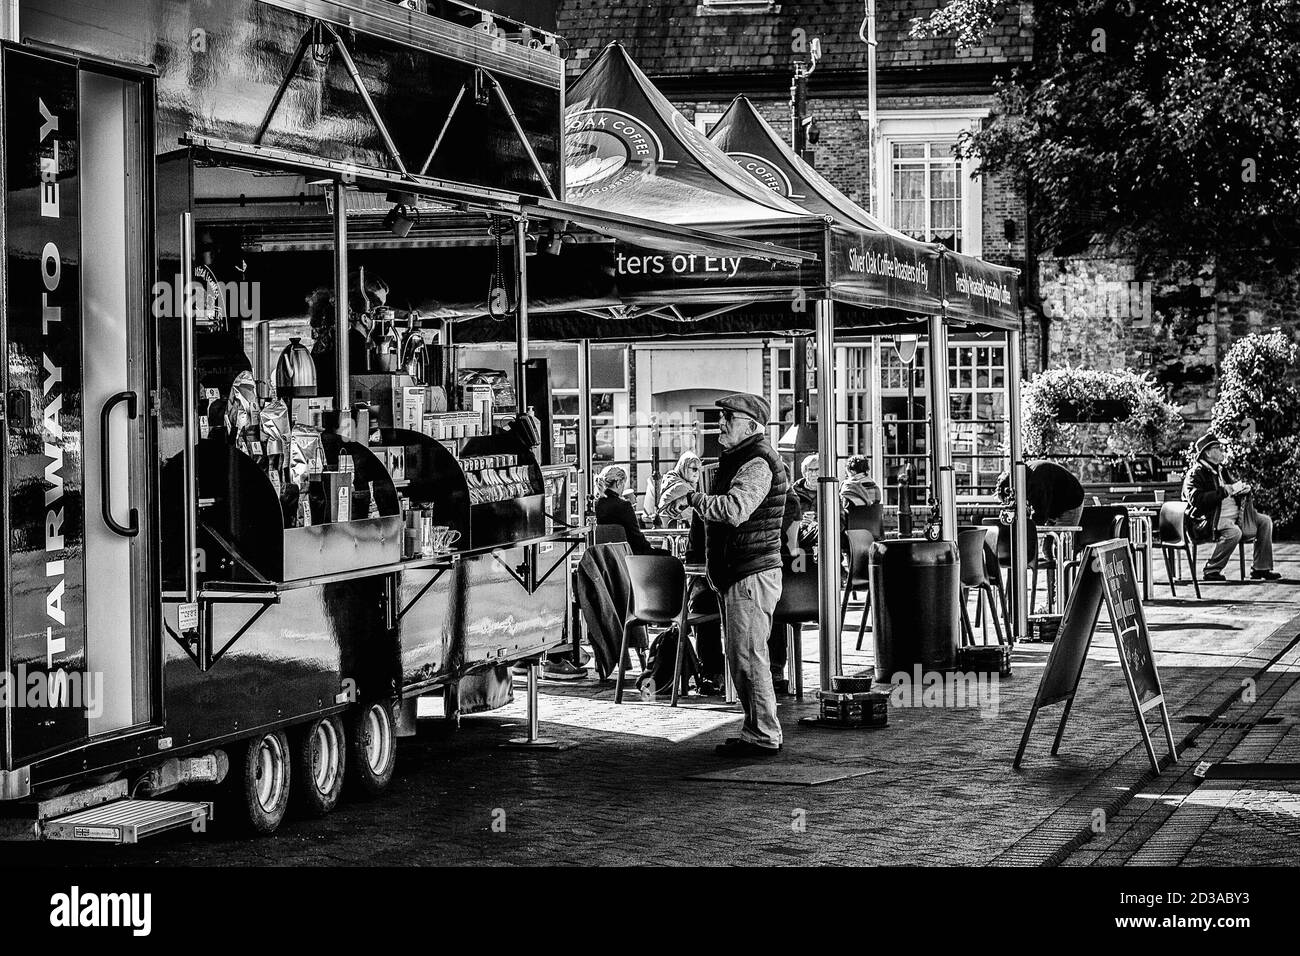 Coffee Truck selling in Market Square in ELY Stock Photo